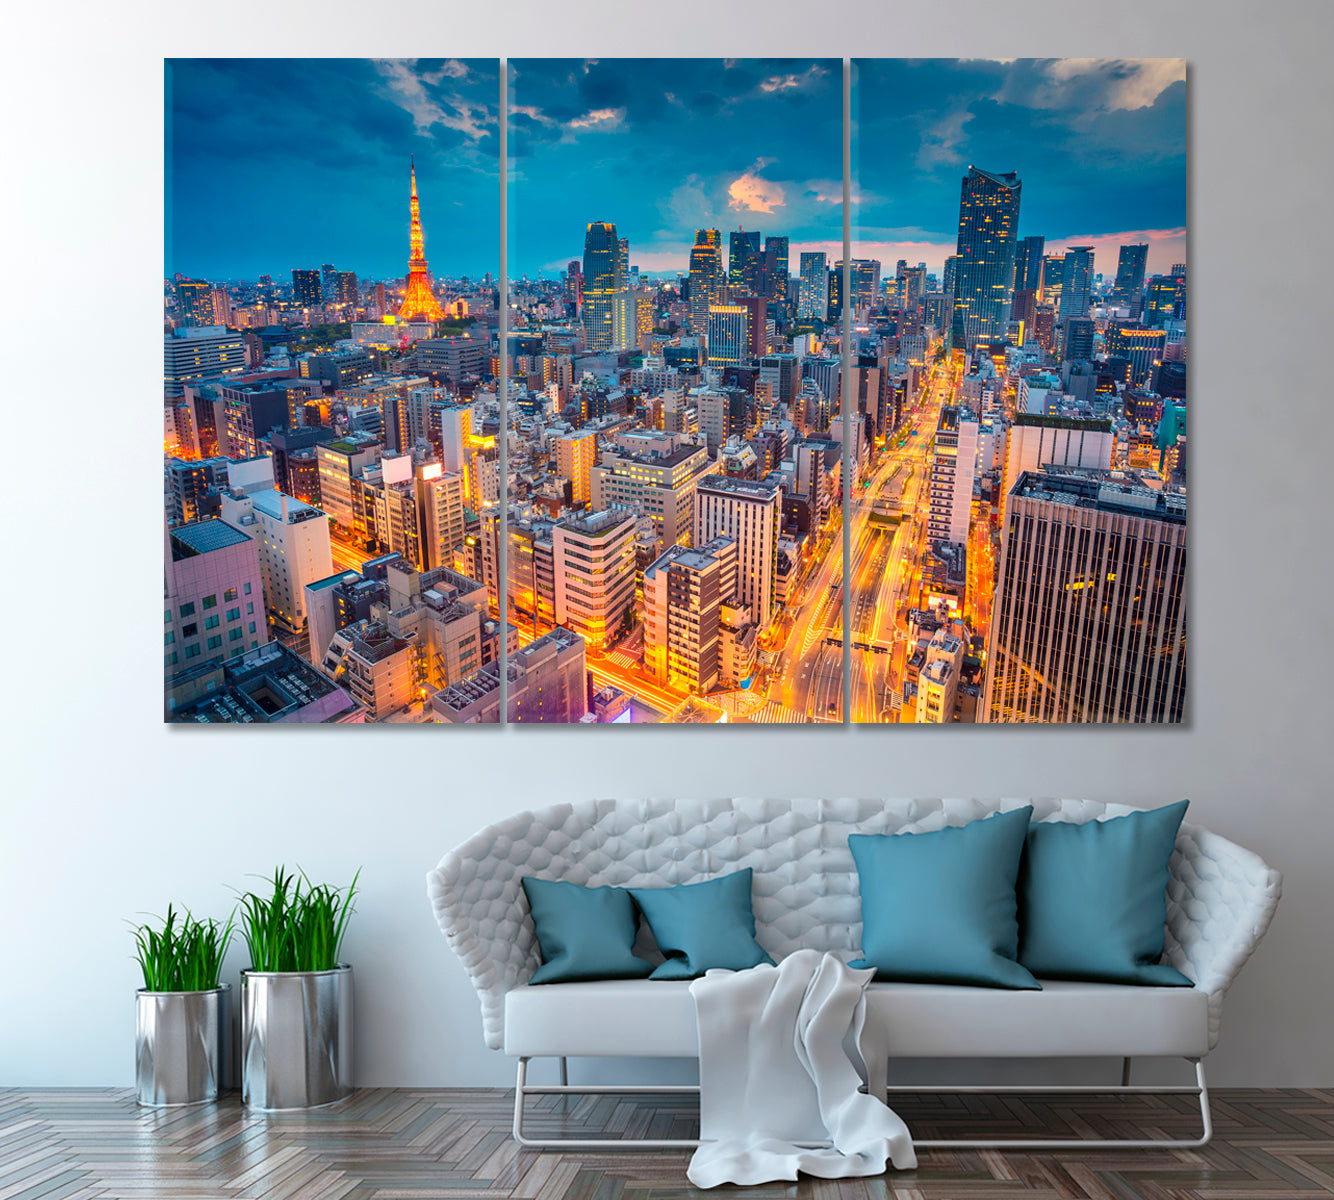 Tokyo Cityscape at Night Canvas Print ArtLexy 3 Panels 36"x24" inches 